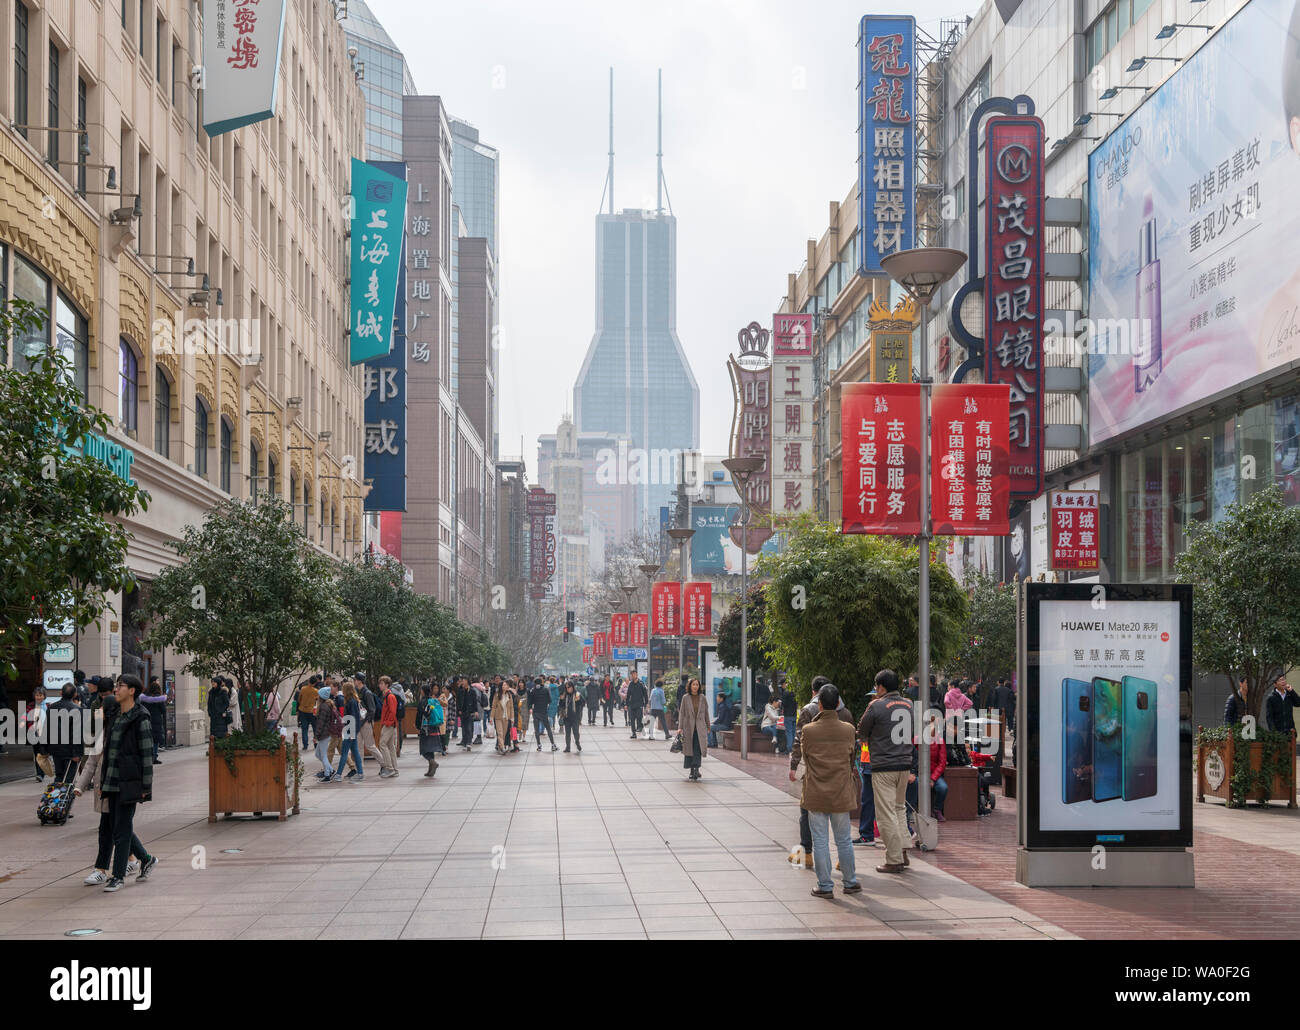 East Nanjing Road, one of the busiest streets in the city, Shanghai, China Stock Photo